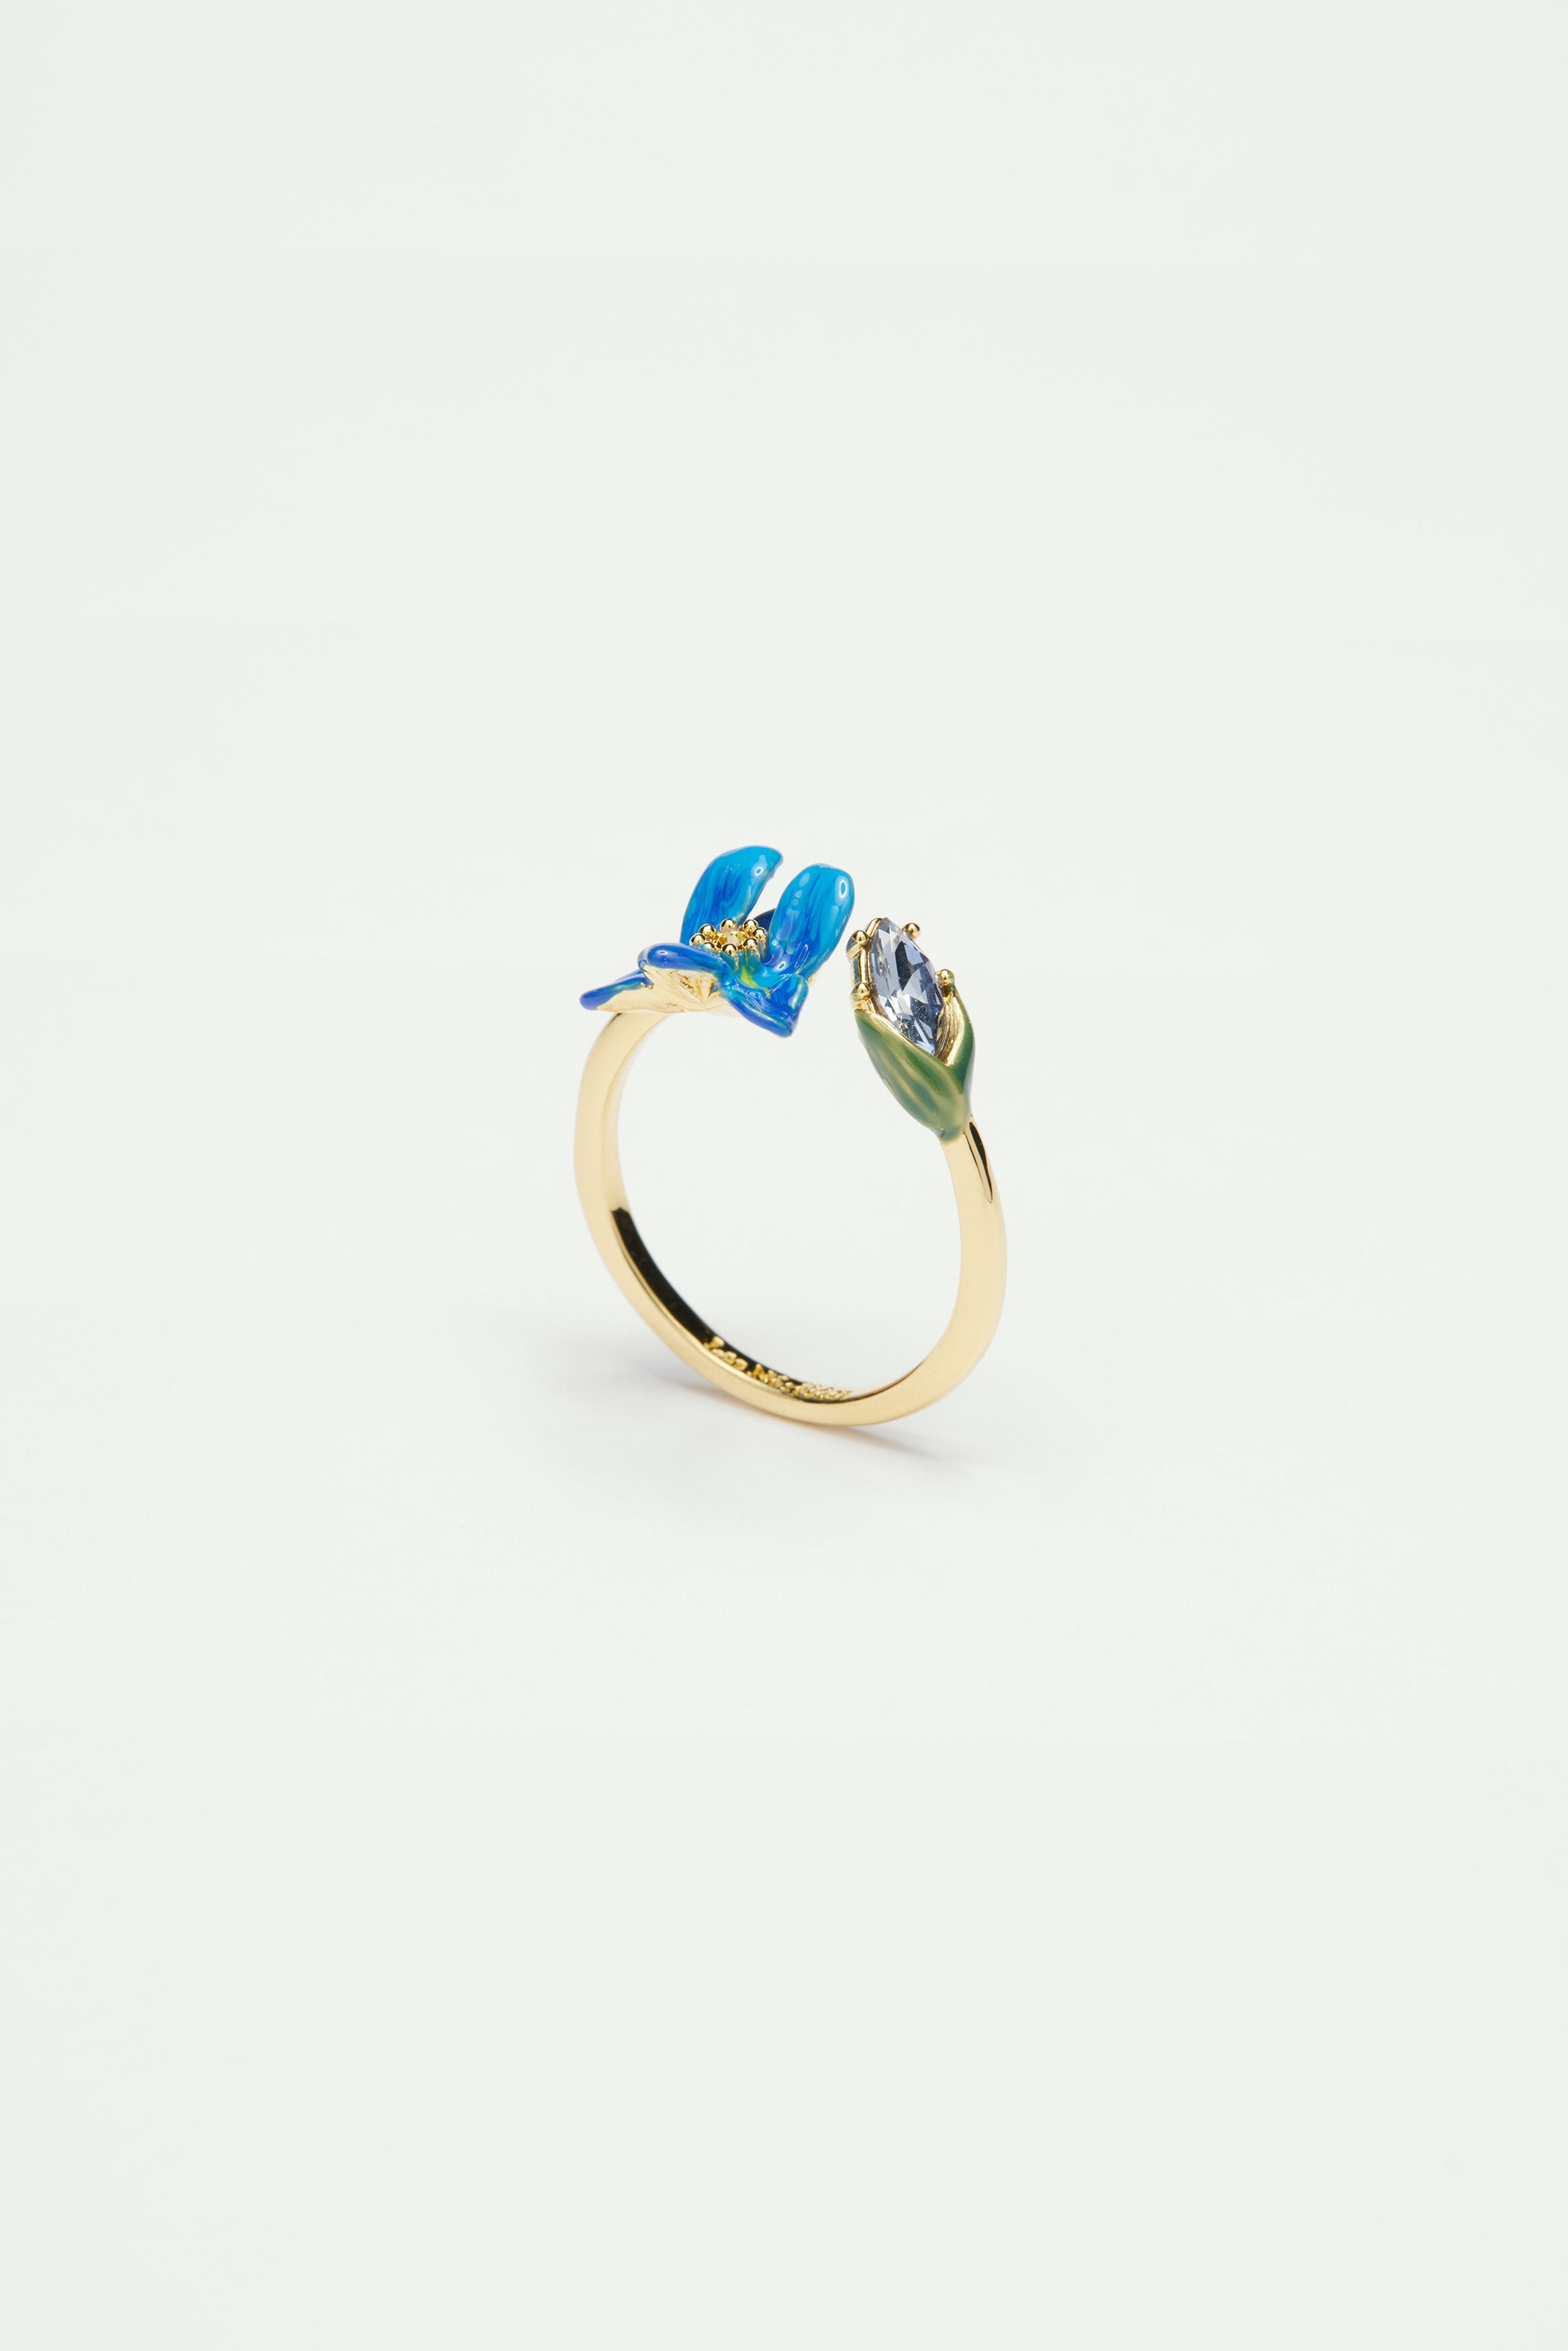 Siberian iris and faceted glass adjustable ring